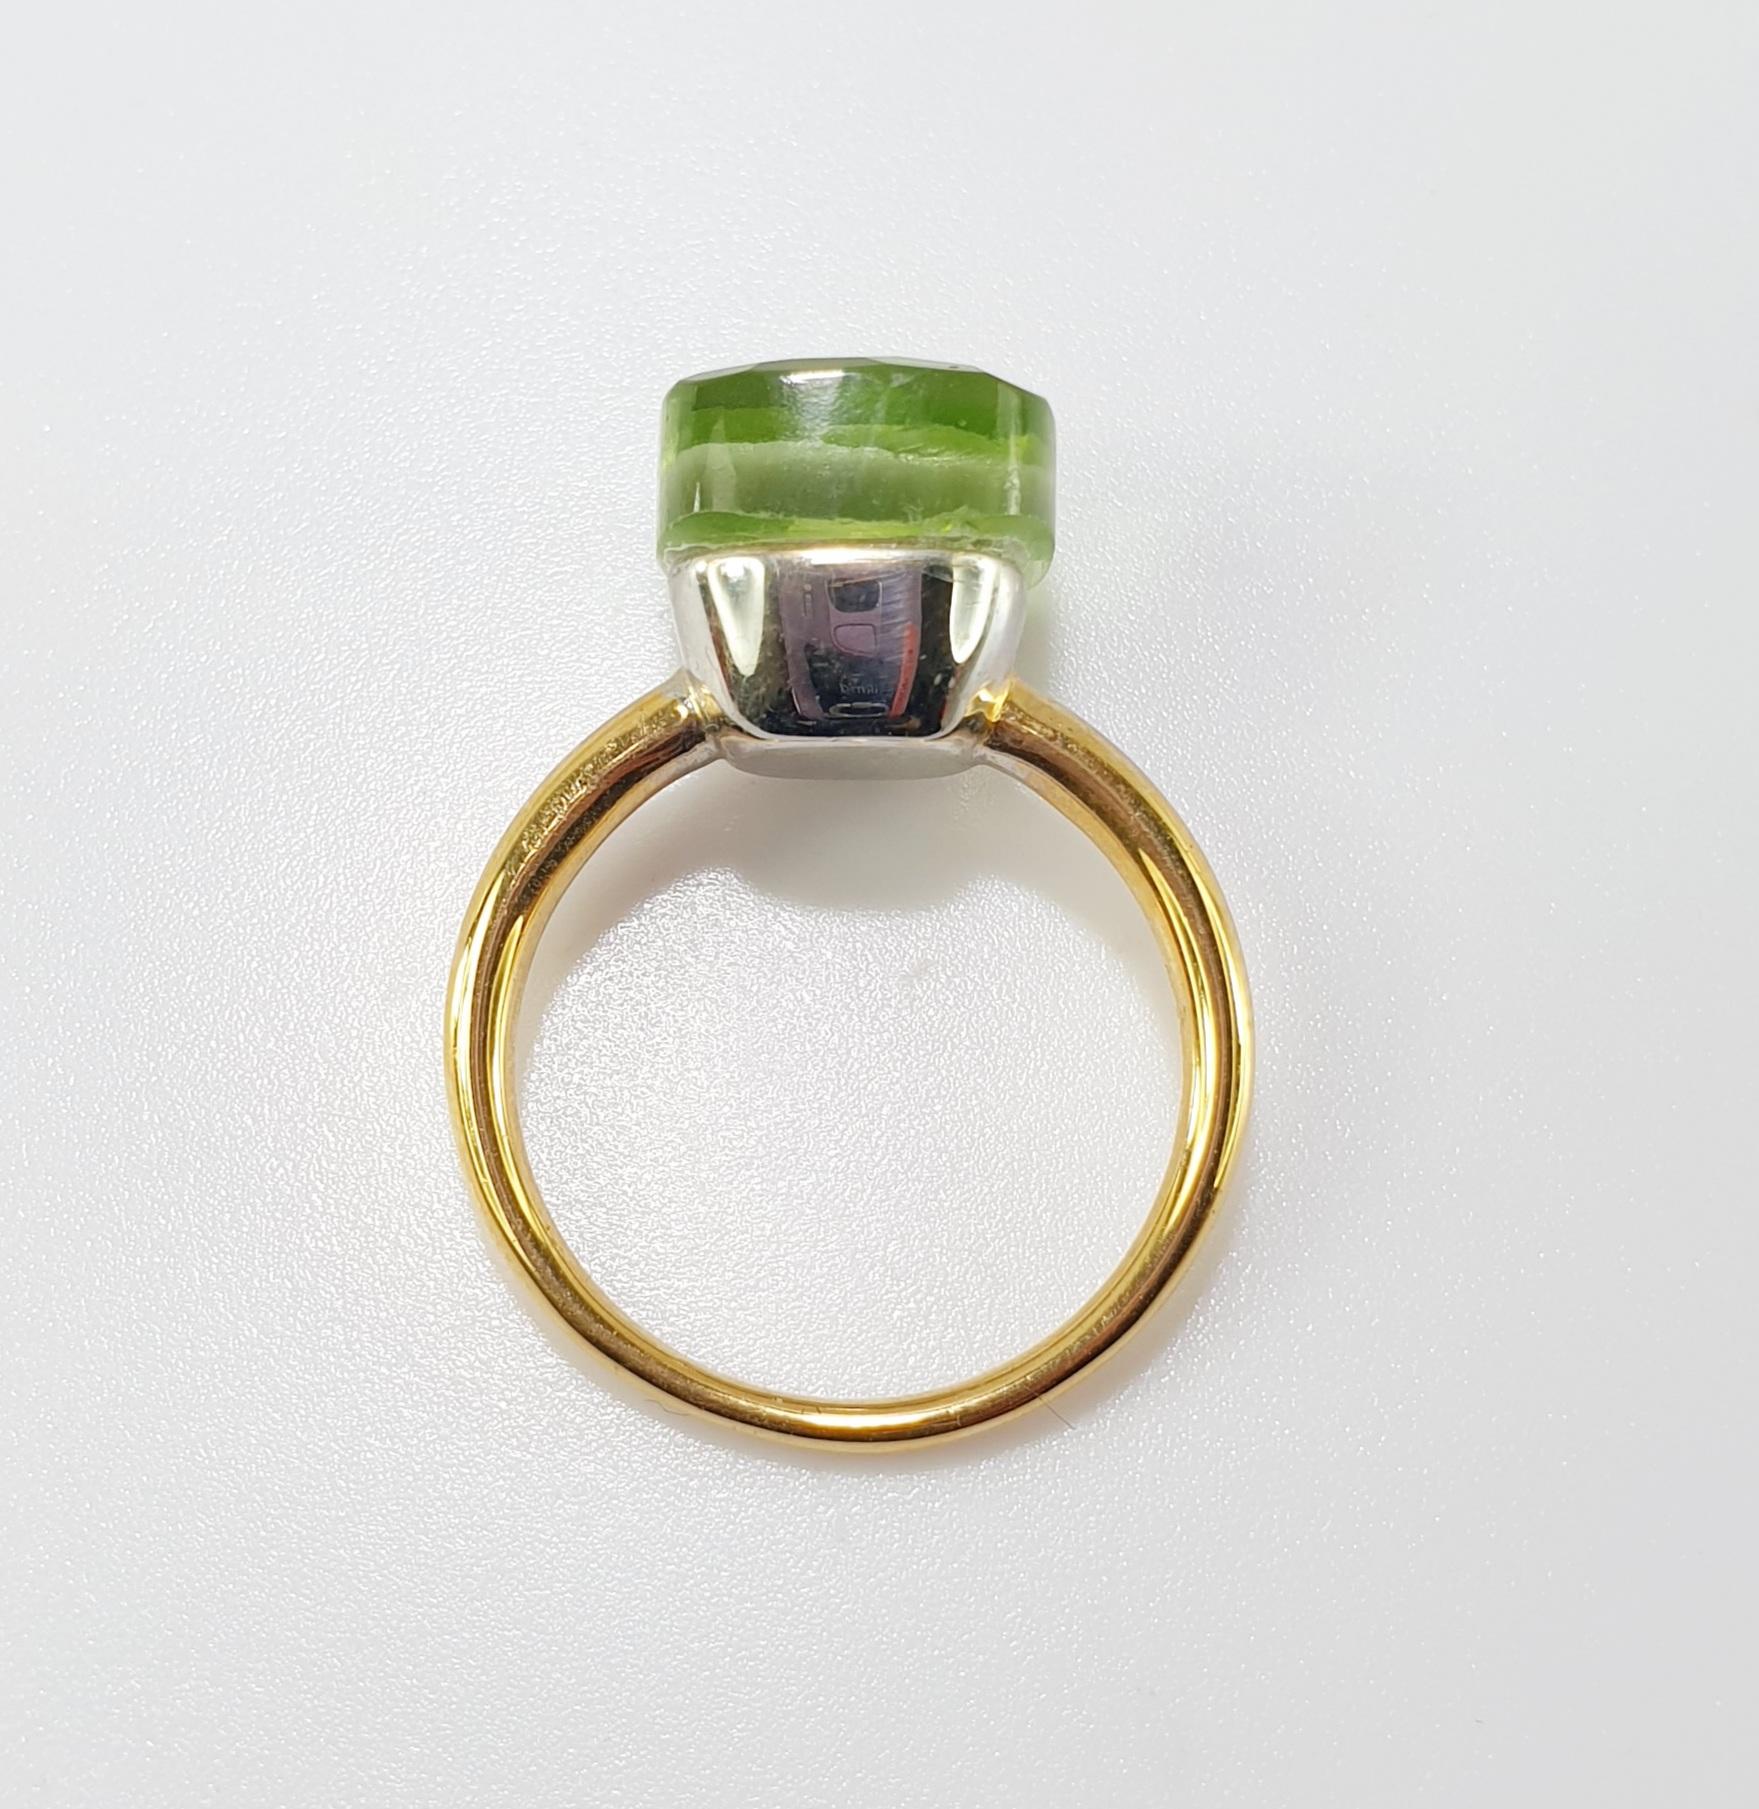 Contemporary Multifaceted Green Eden Quartz 18K White and Yellow Gold Fashion Ring For Sale